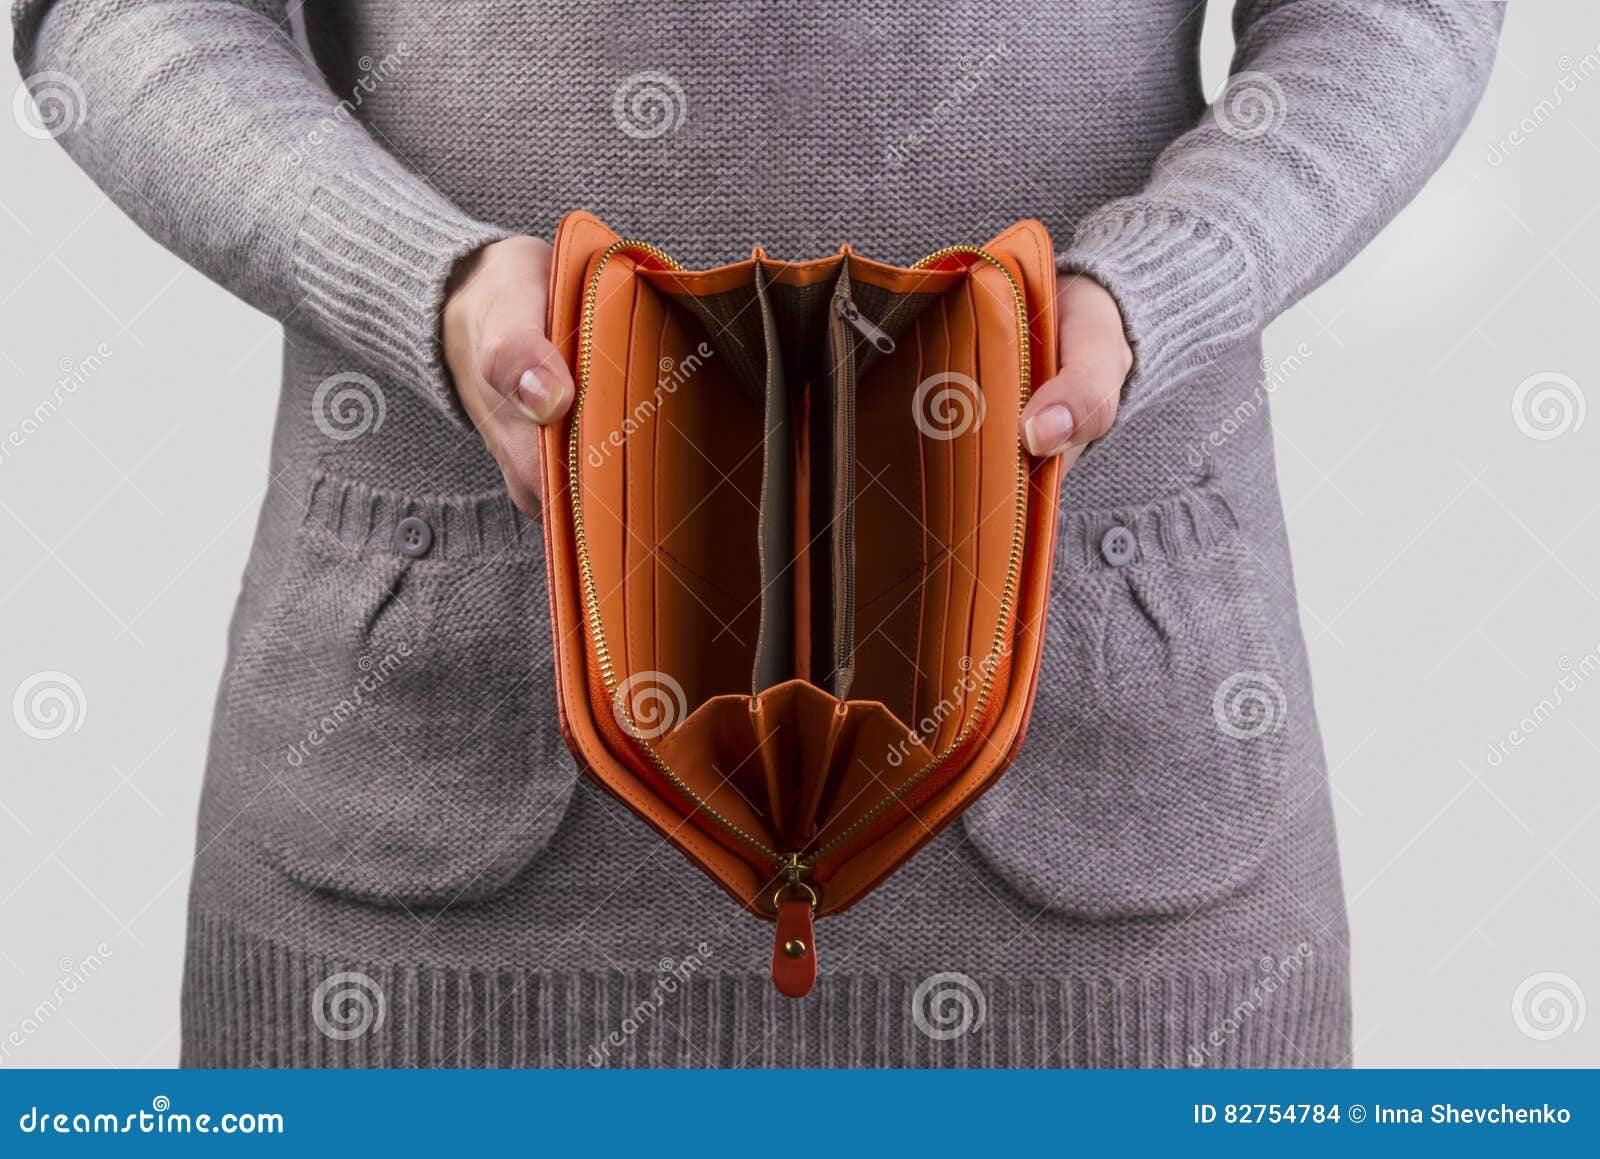 Woman Showing Empty Purse - Stock Photos | Motion Array